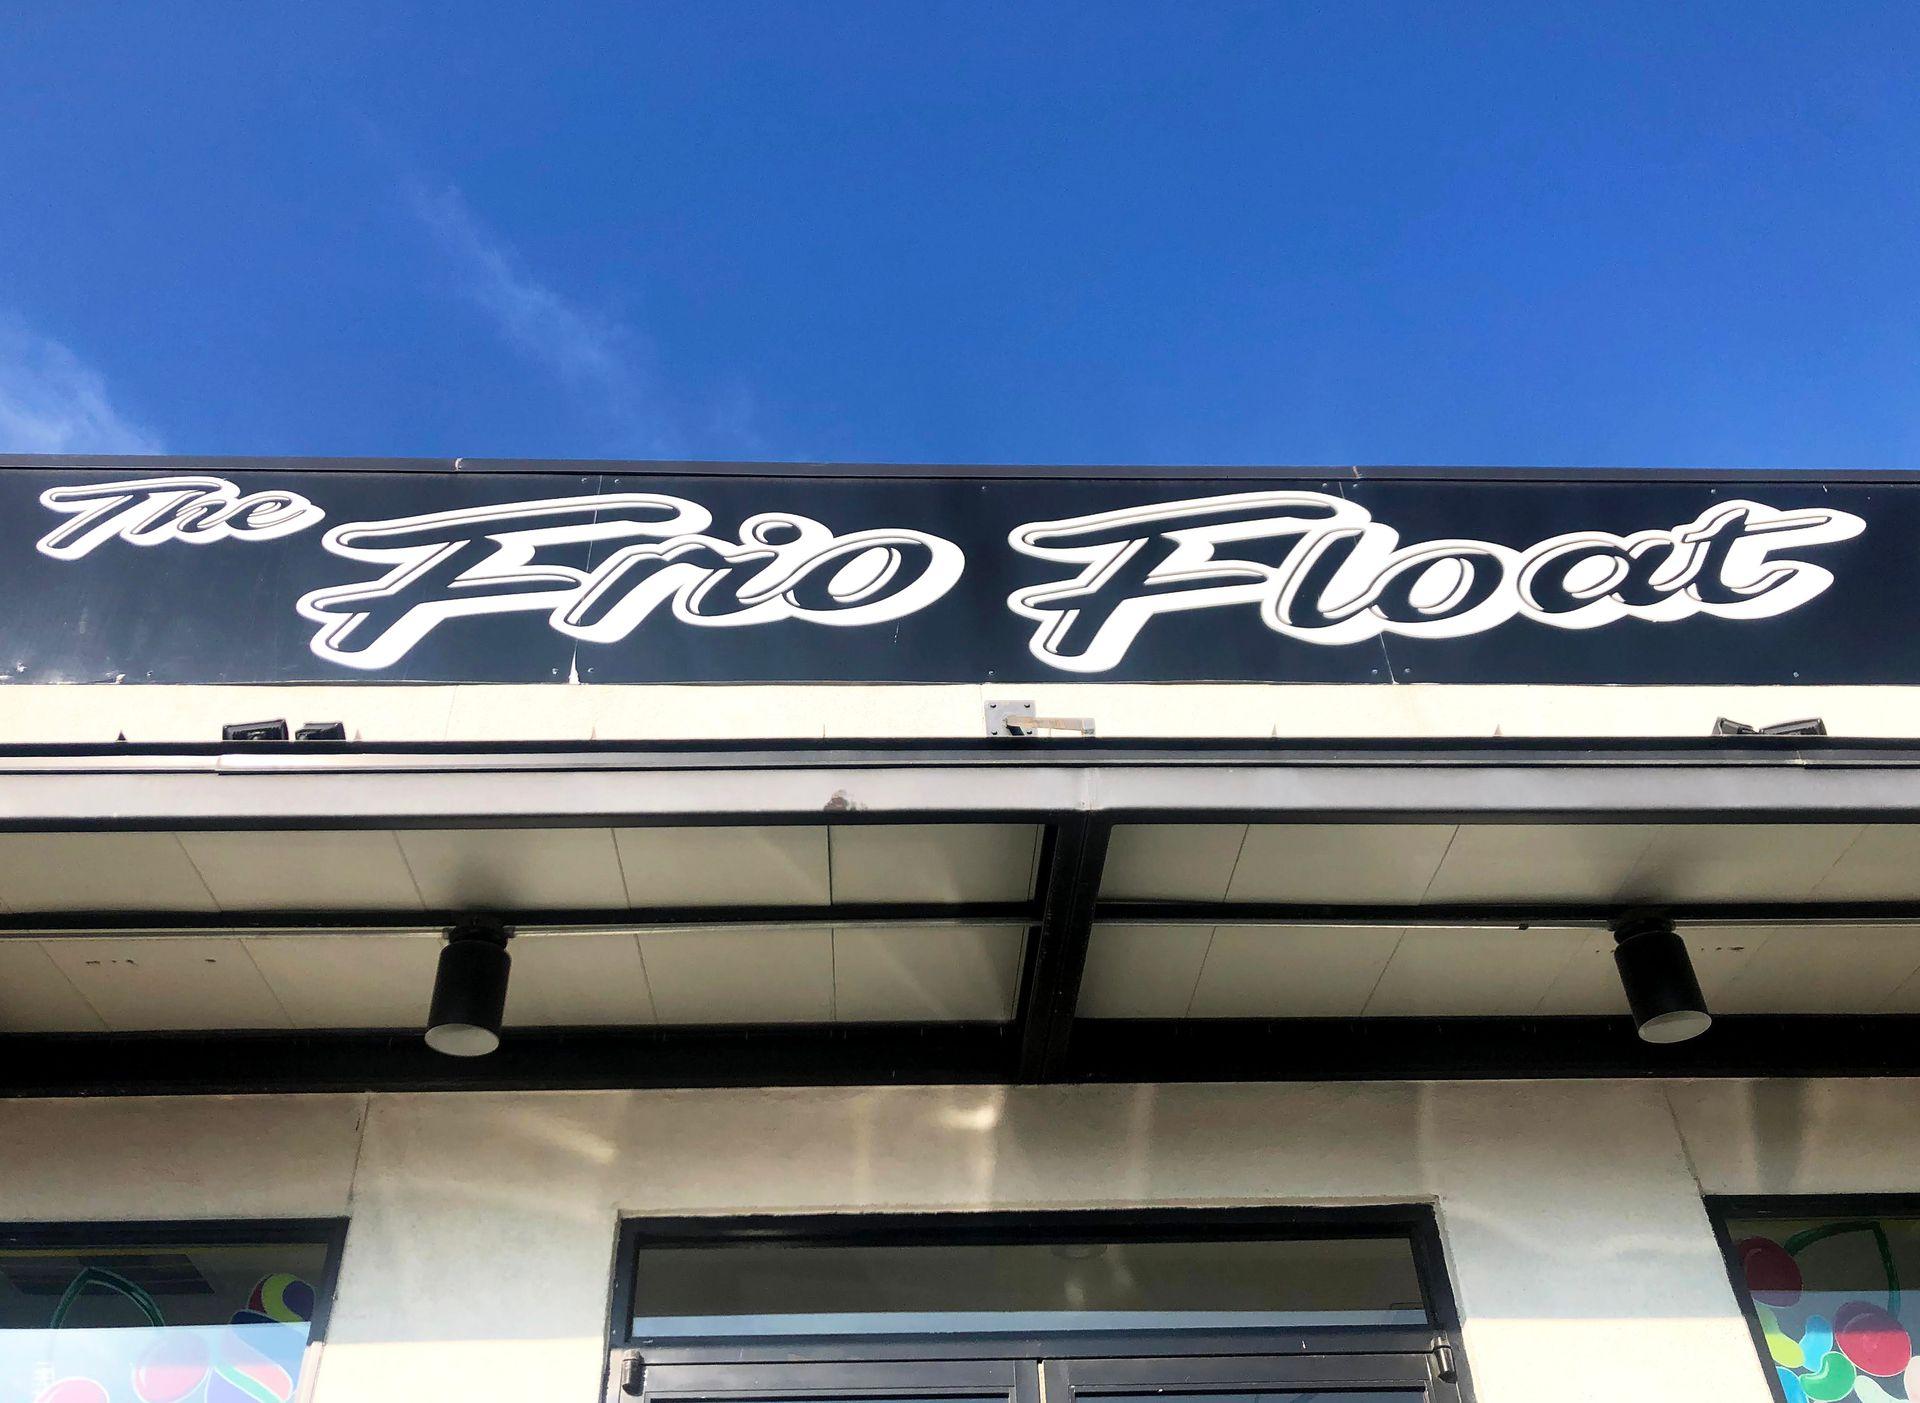 The exterior of the Frio Float ice cream parlor.